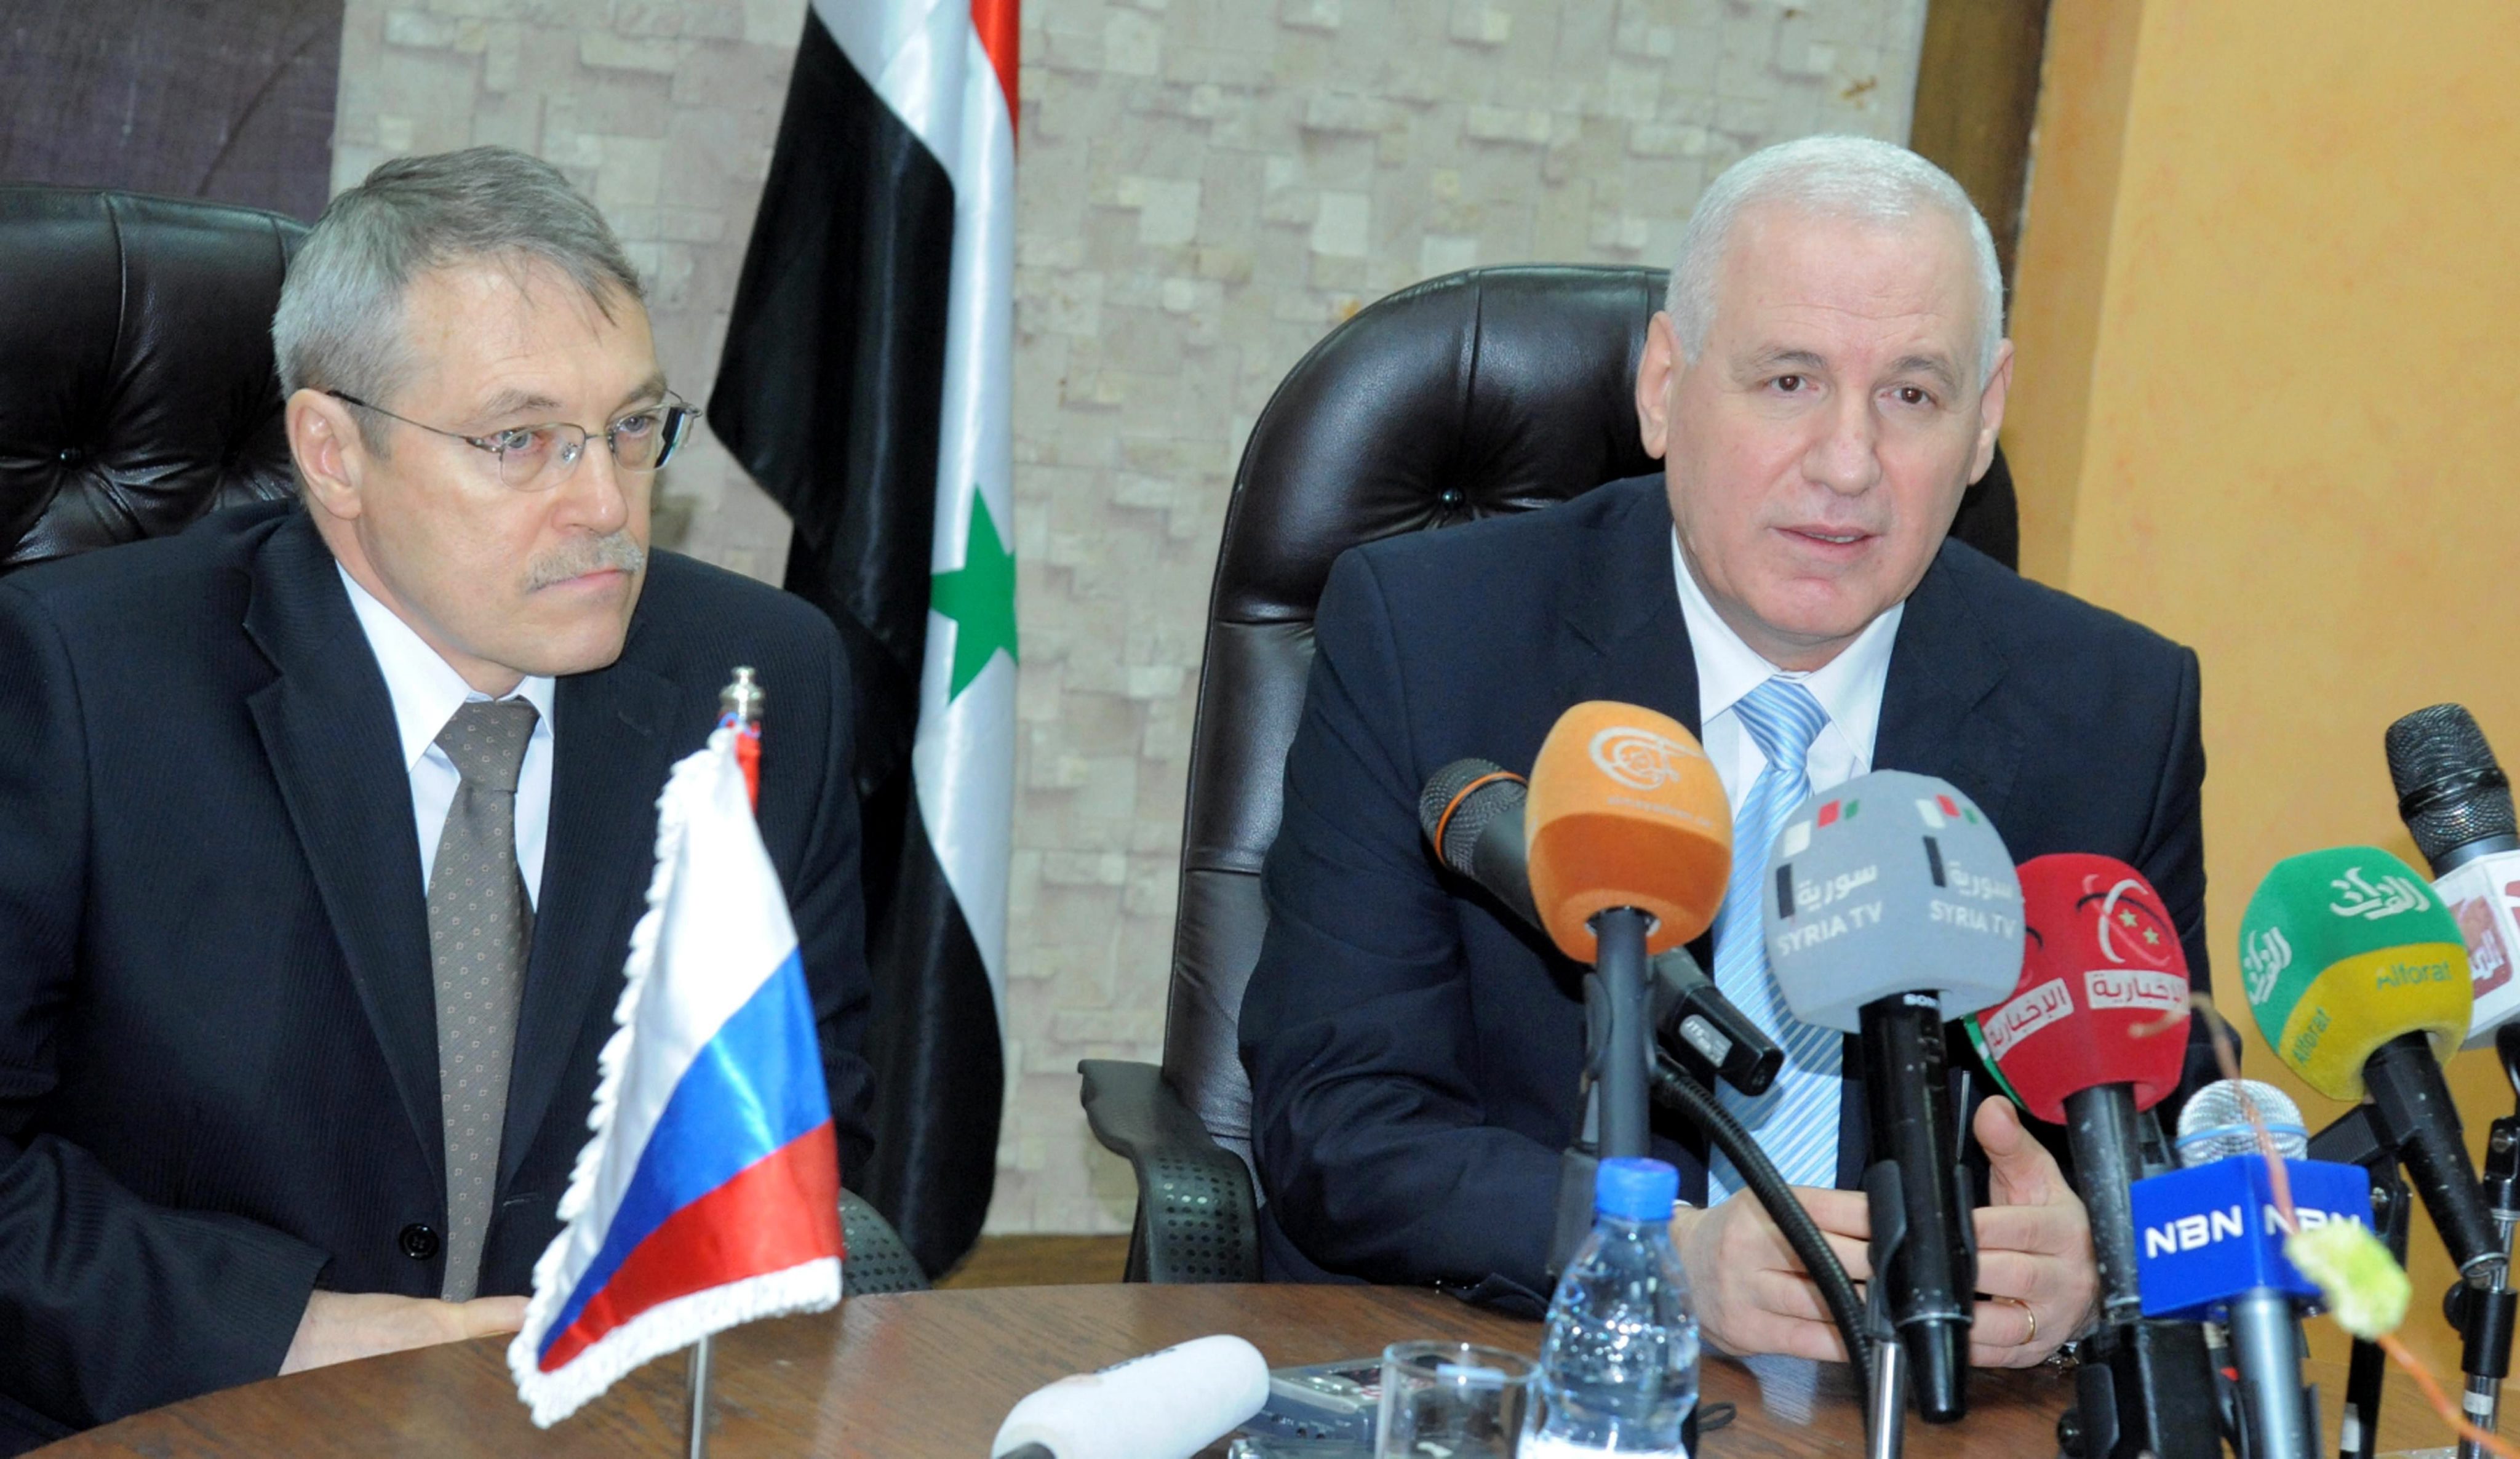 Syria's Oil Minister Suleiman Abbas (right) and Russia's Ambassador in Damascus Azmatullah Kulmohammadov sign an oil agreement in Damascus on Wednesday. Photo: EPA